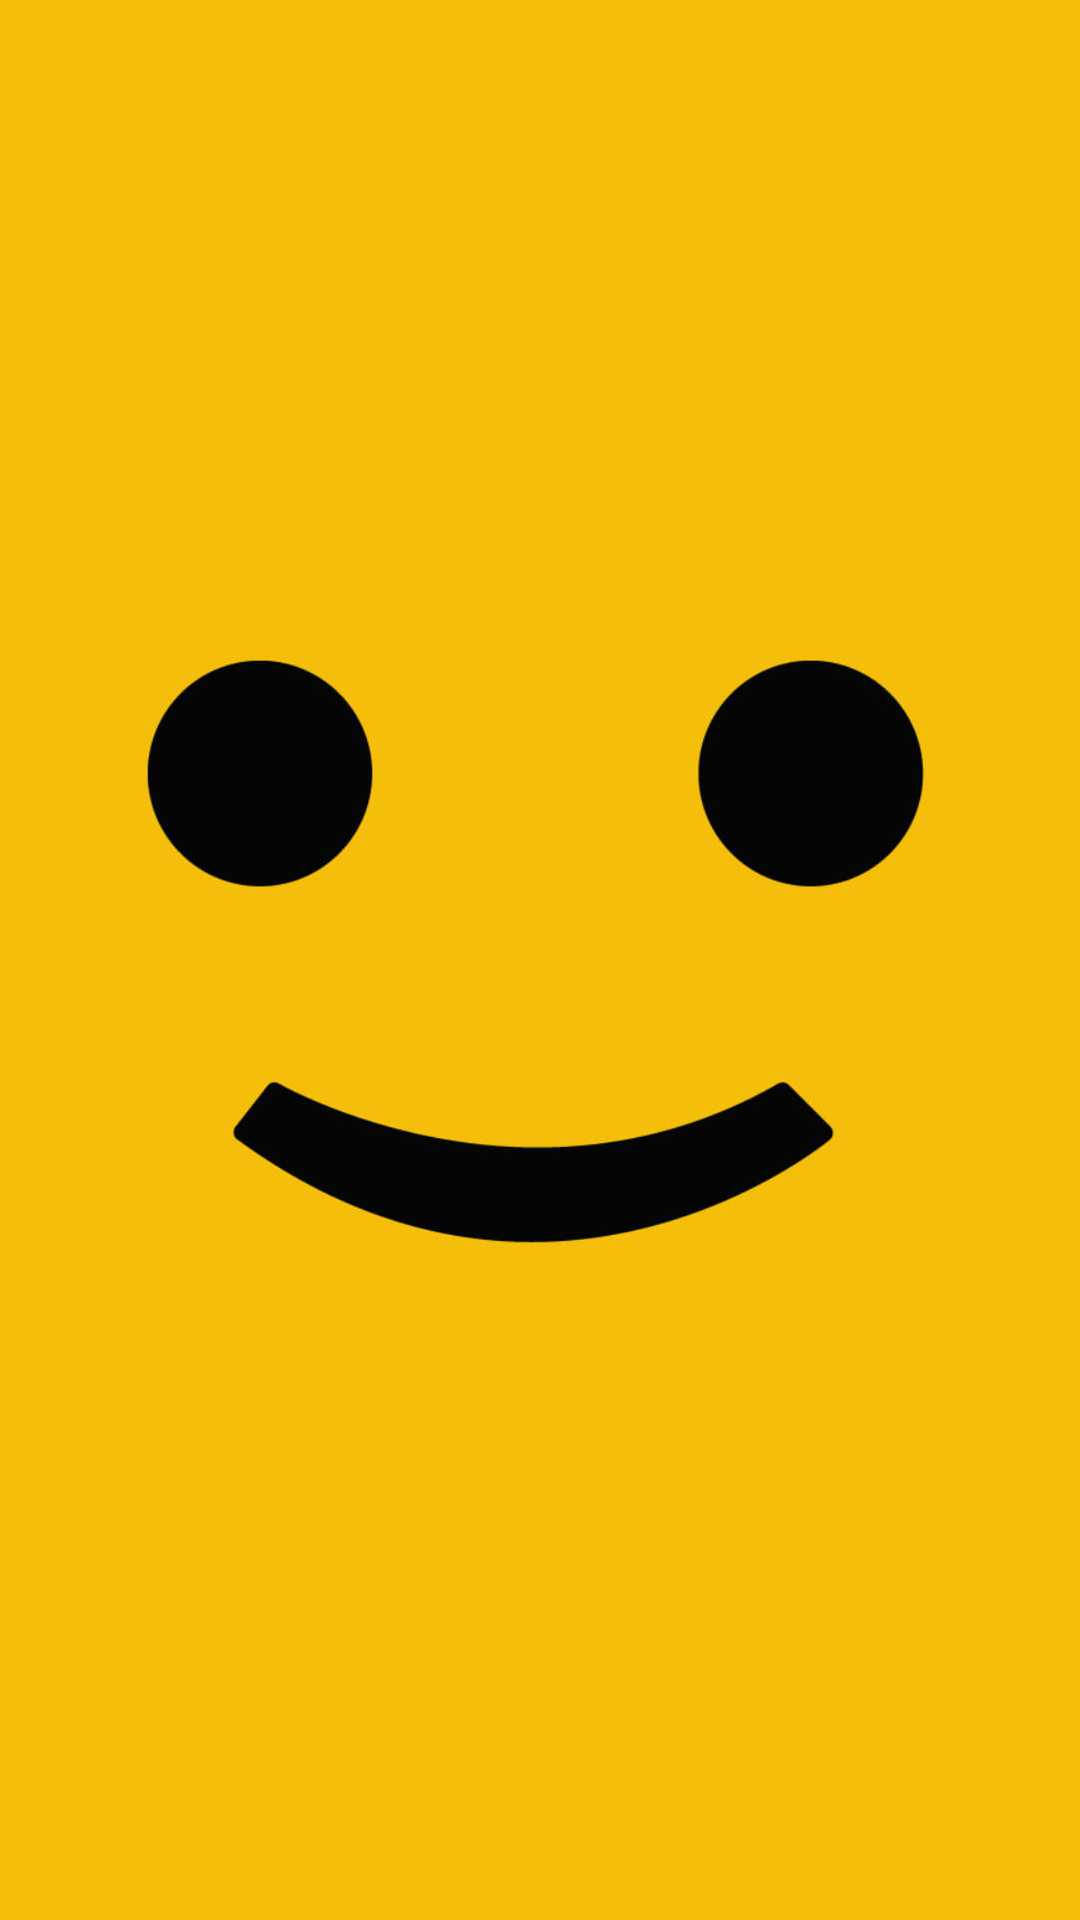 Smiley Face Minimalist Yellow Background